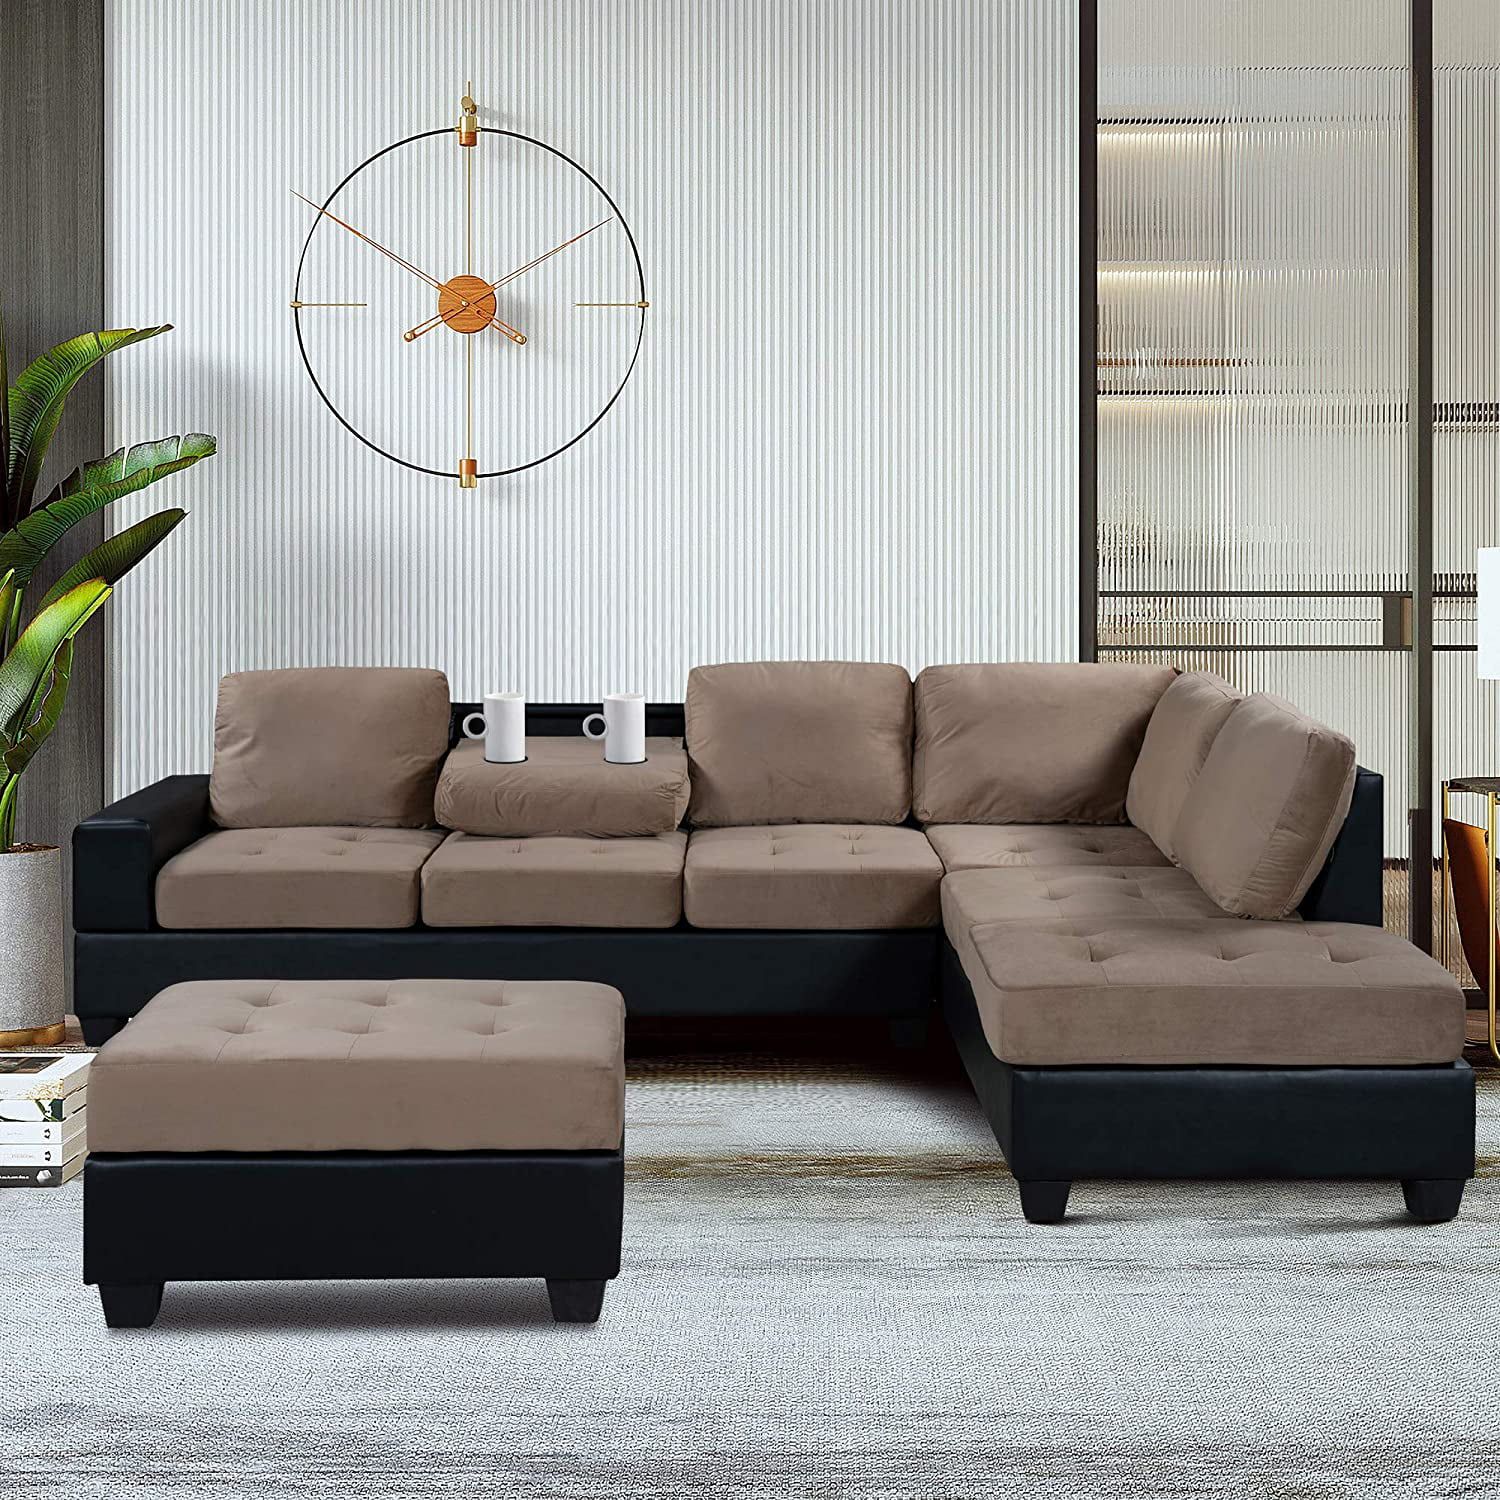 3 Piece Convertible Sectional Sofa L Shaped Couch With Reversible Intended For 3 Seat Convertible Sectional Sofas (Gallery 12 of 20)